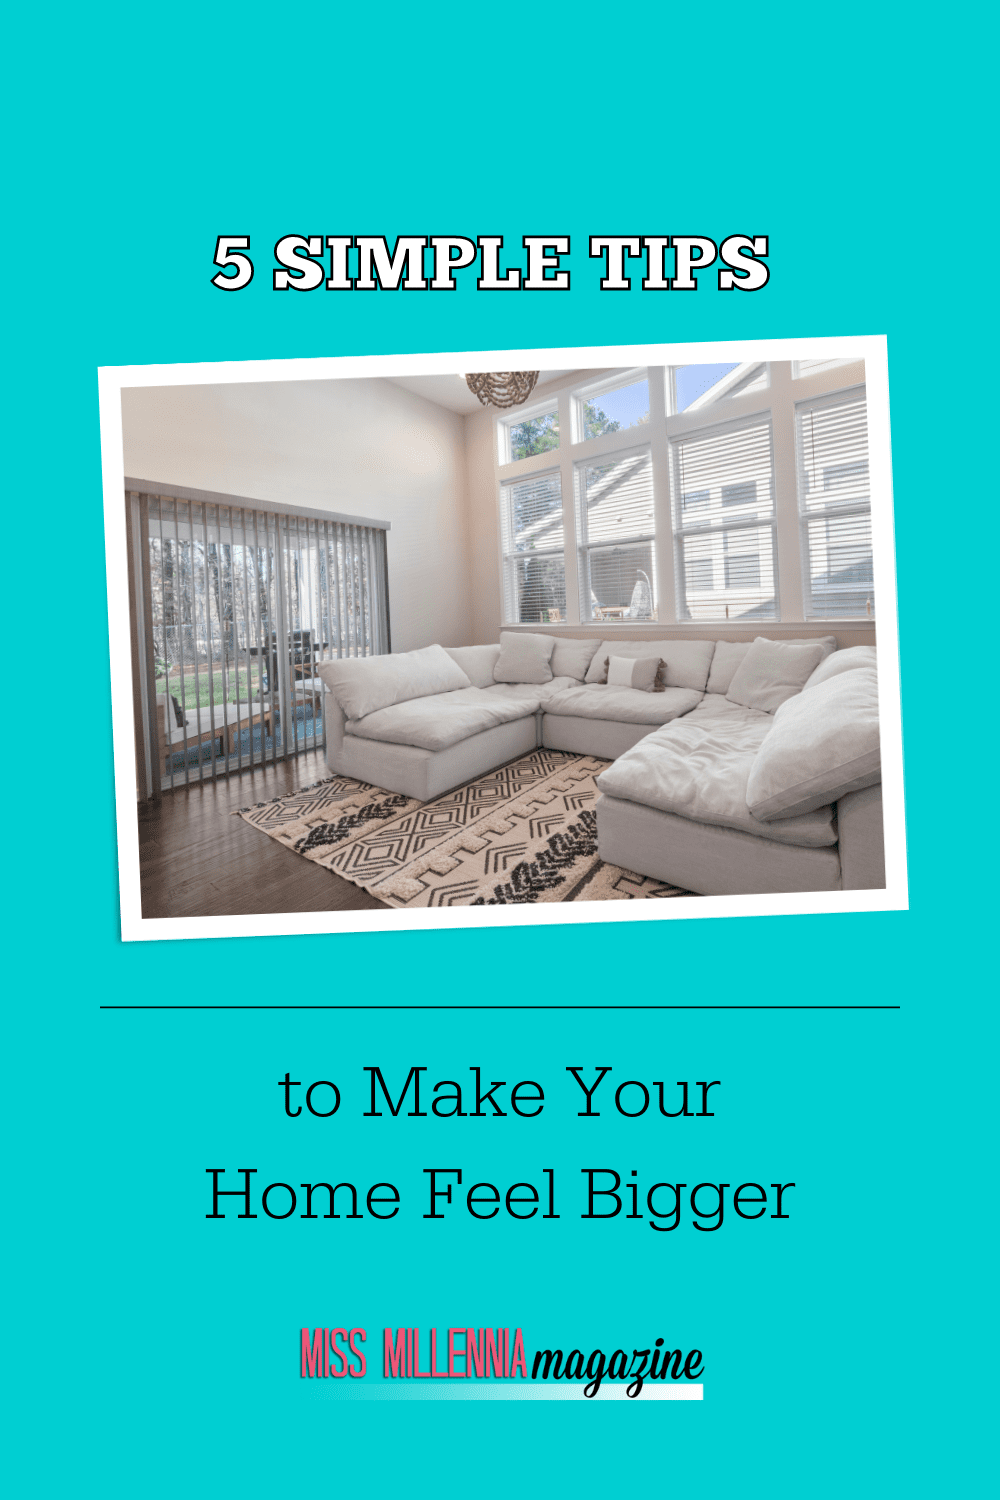 5 Simple Tips to Make Your Home Feel Bigger